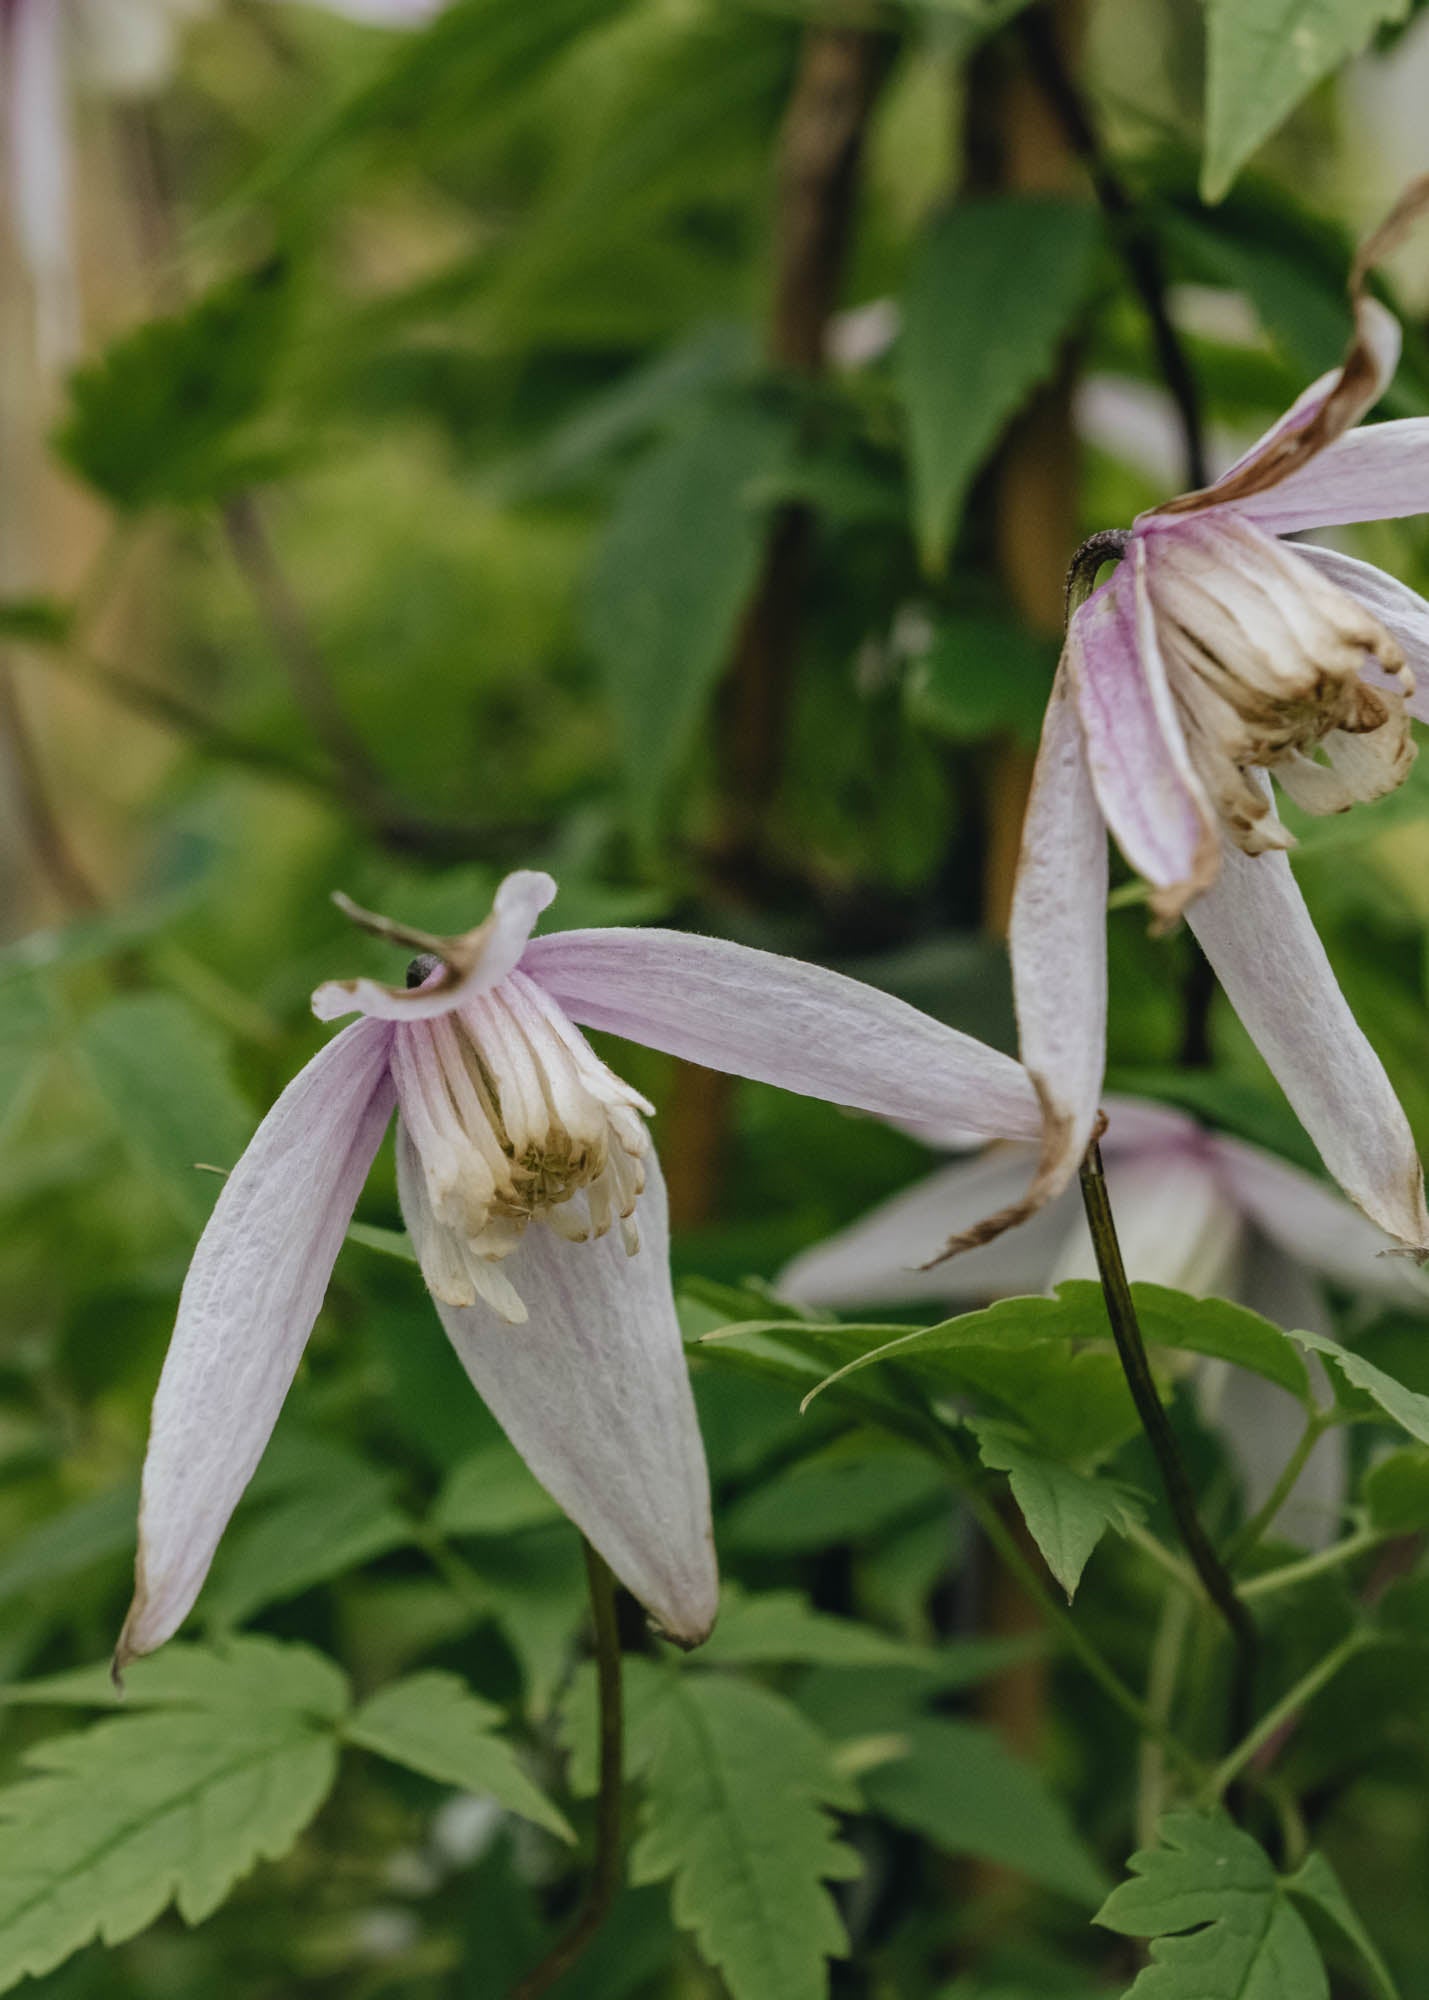 Clematis Alpina Willy